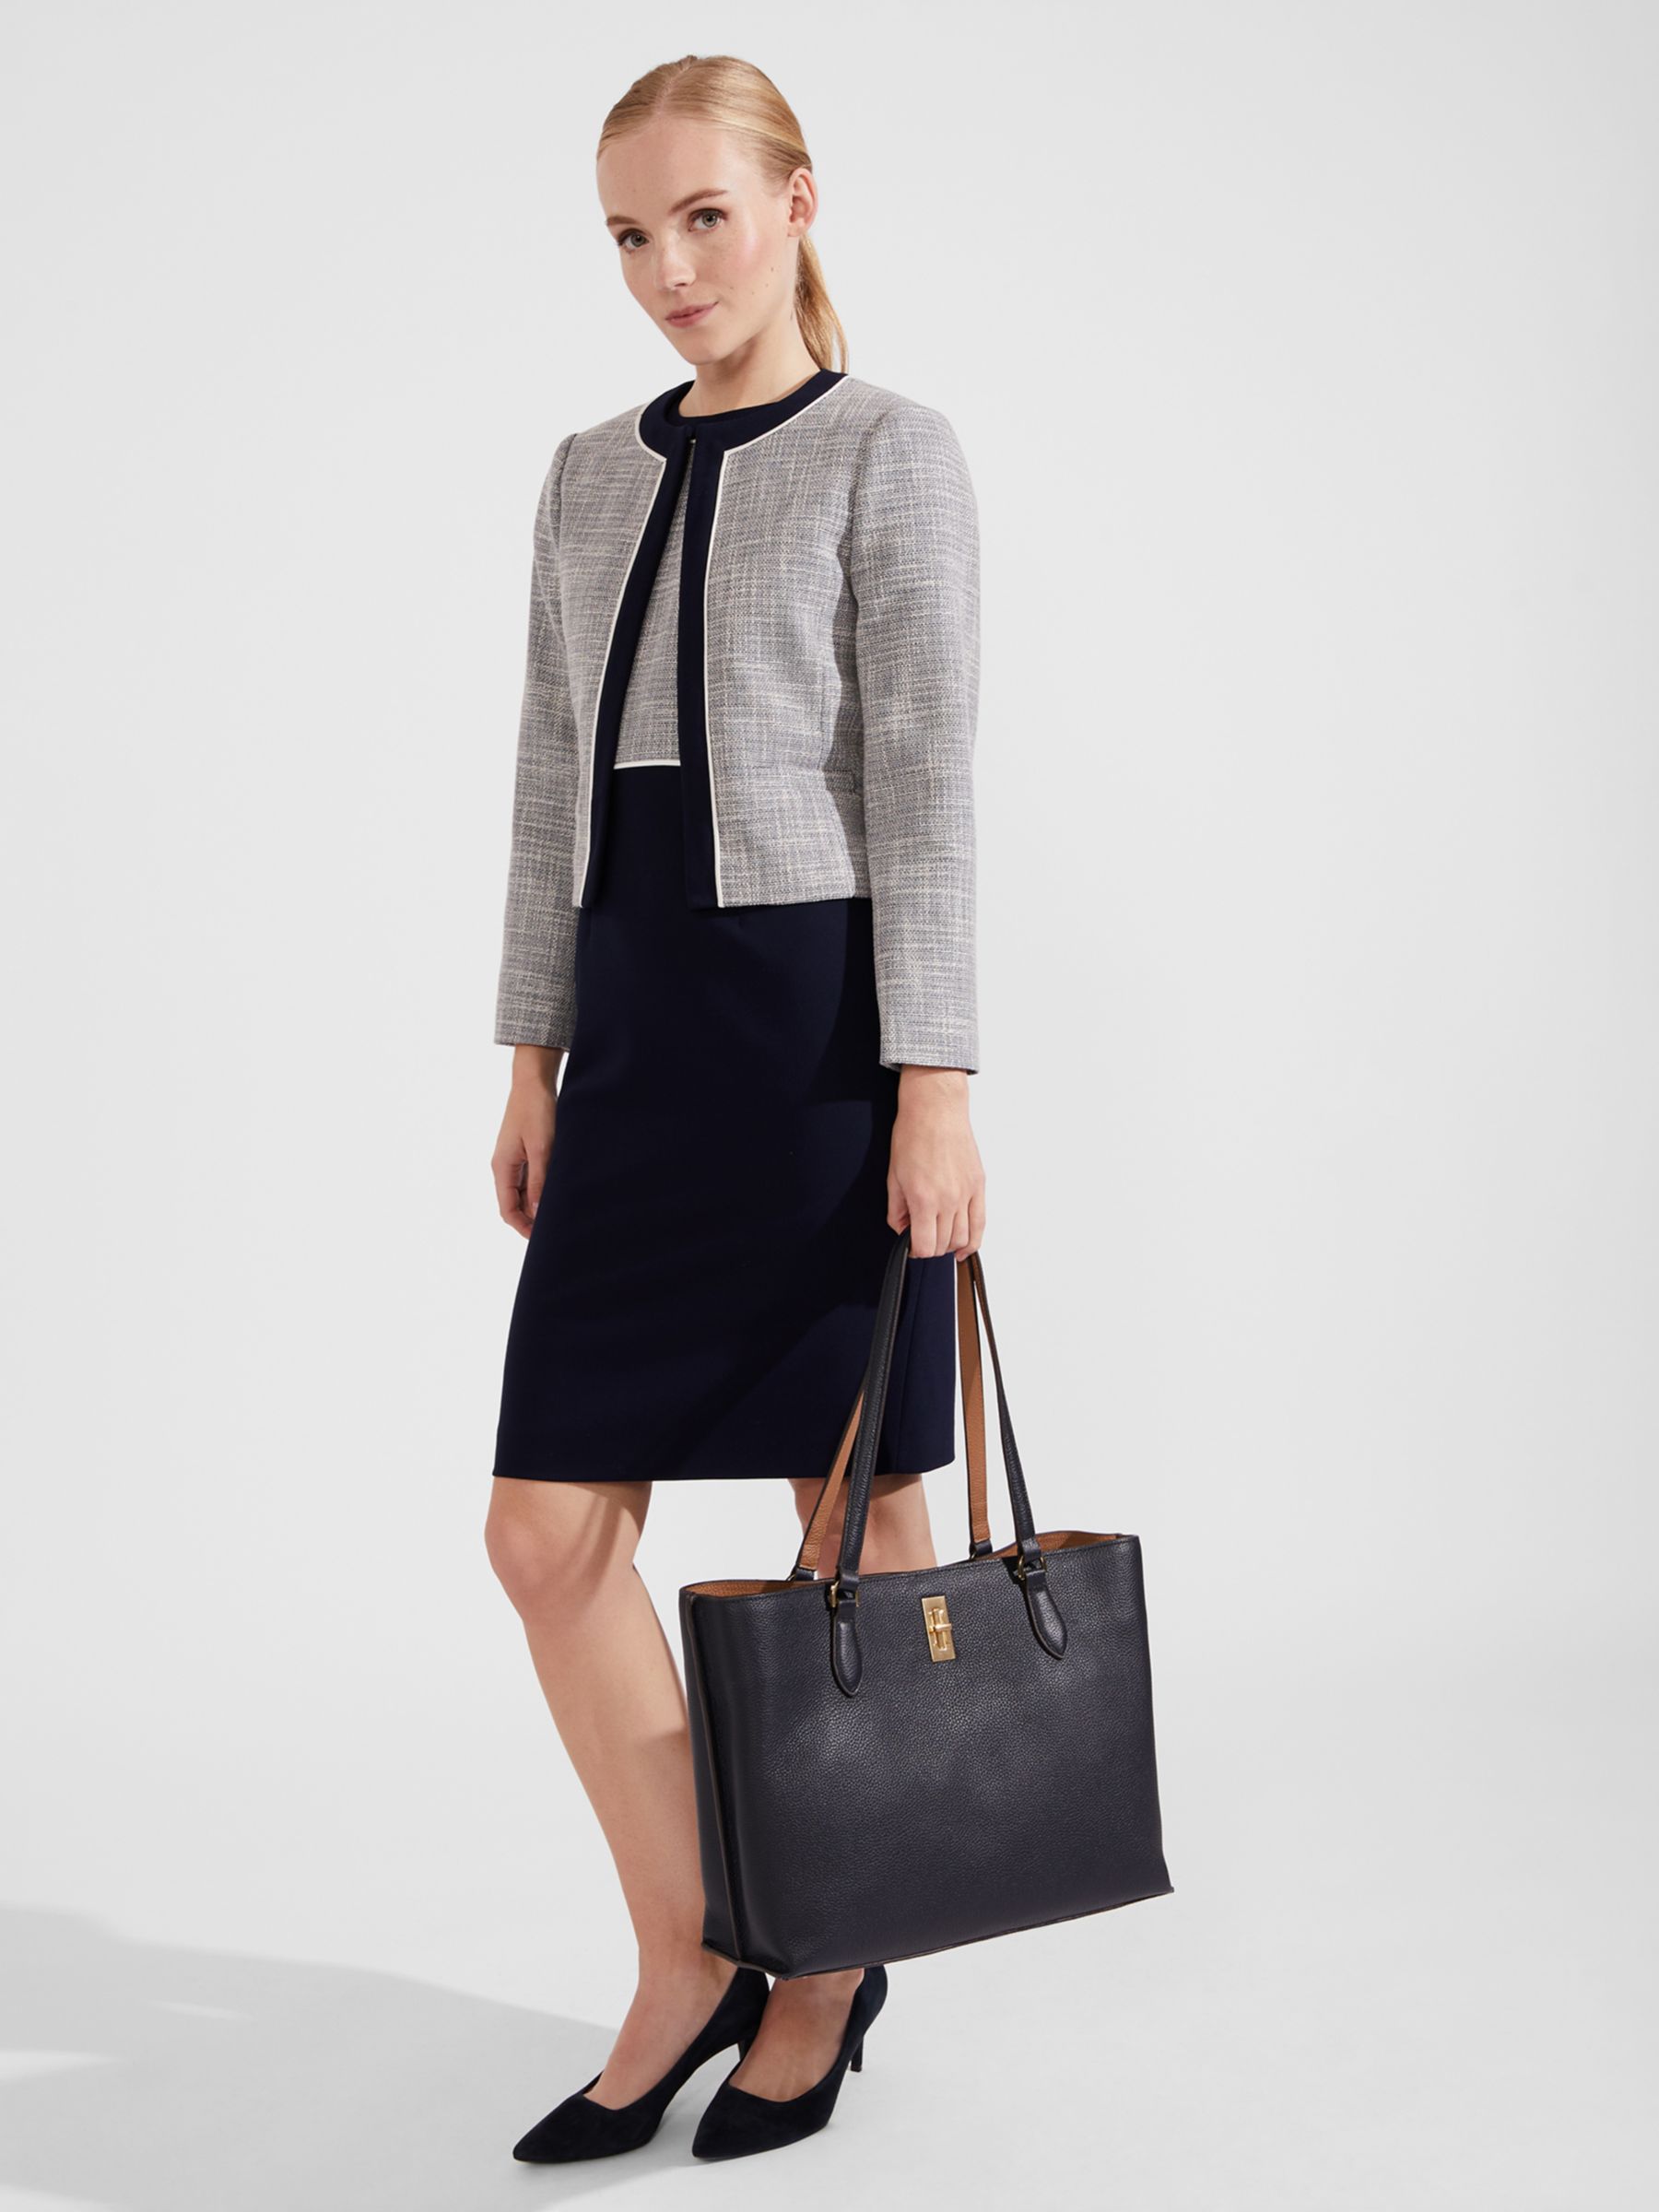 Buy Hobbs Laurie Cropped Blazer, Navy/Ivory Online at johnlewis.com